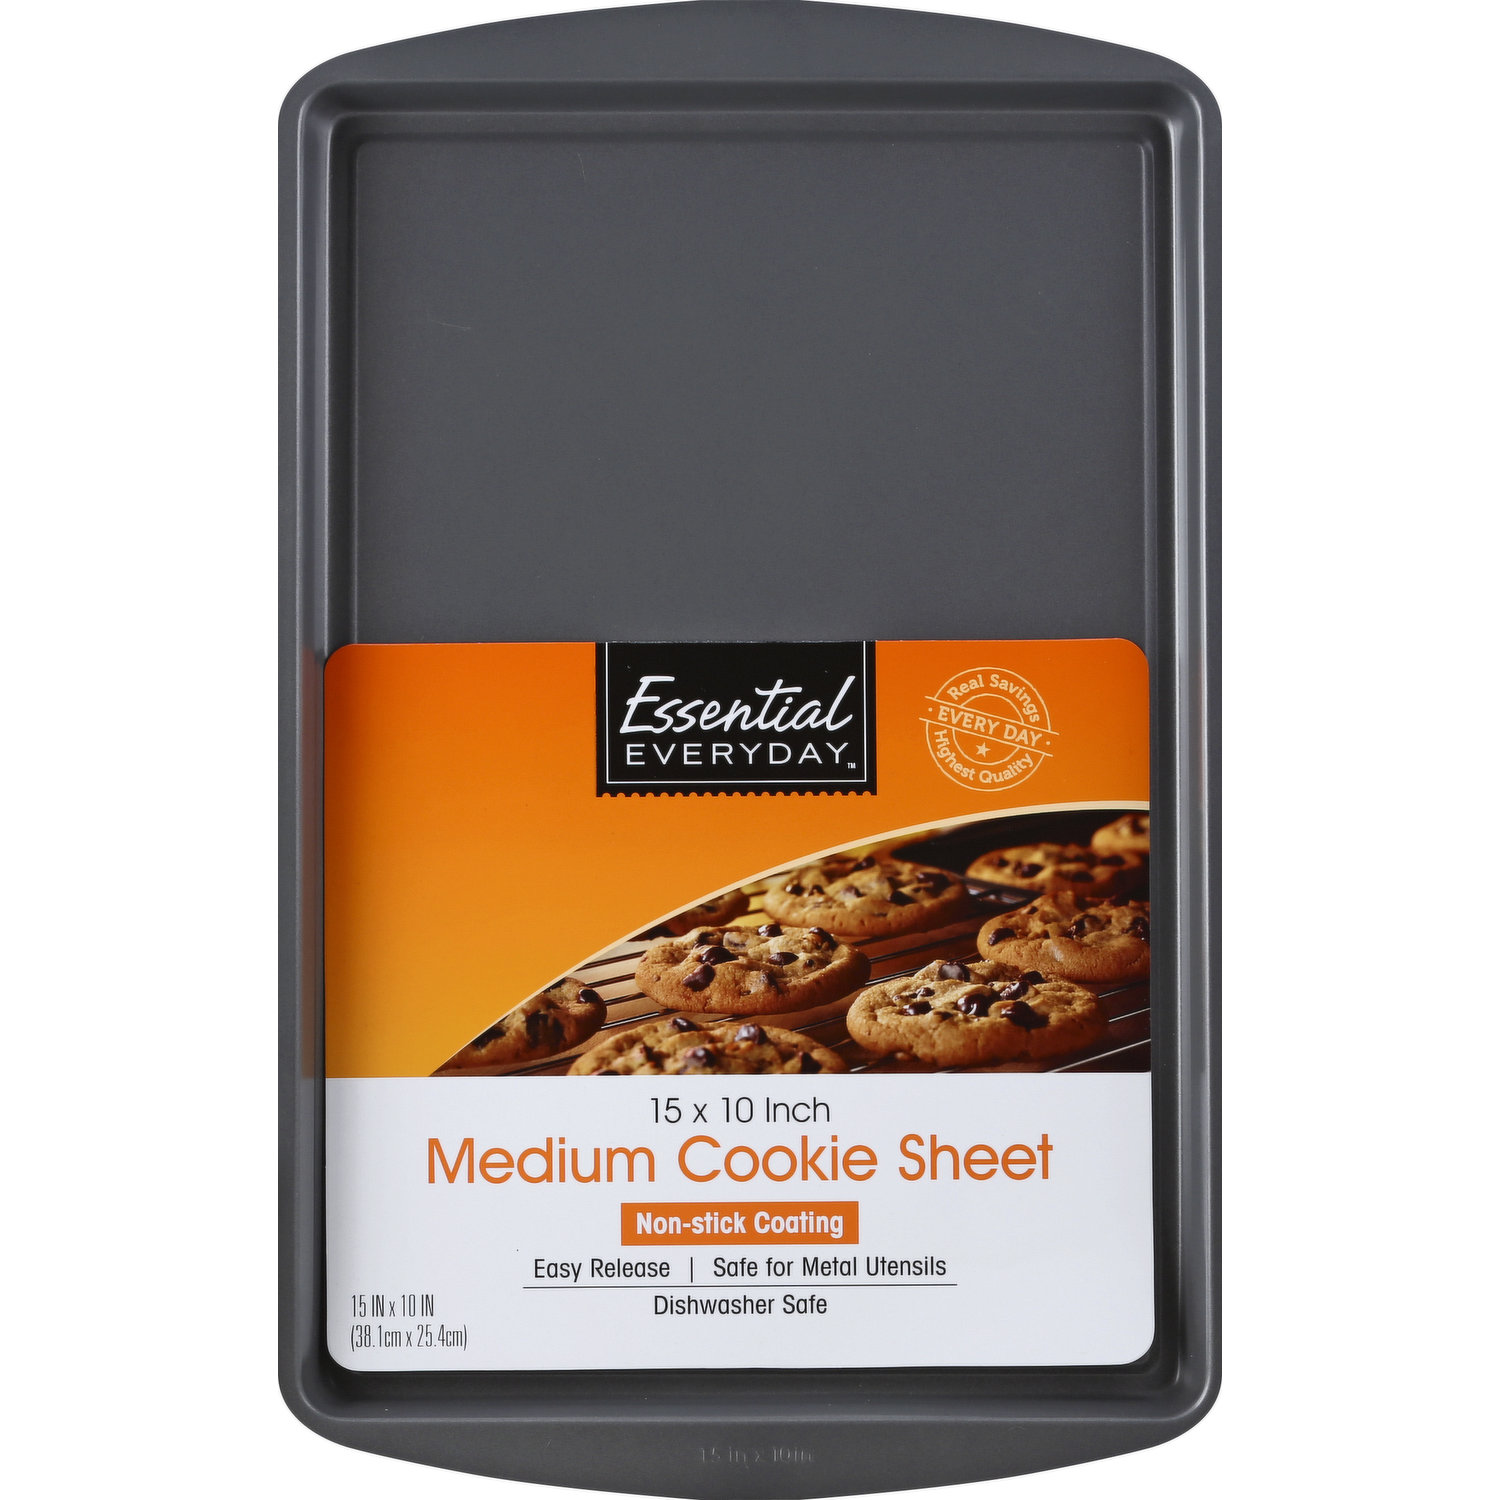  Baker's Secret Set of 3 Cookie Sheets, 15 17 19, Nonstick  Coating for Easy Release, Cookie Trays for Baking Roasting Cooking,  Dishwasher Safe DIY Home Baking Supplies - Essentials Collection: Home